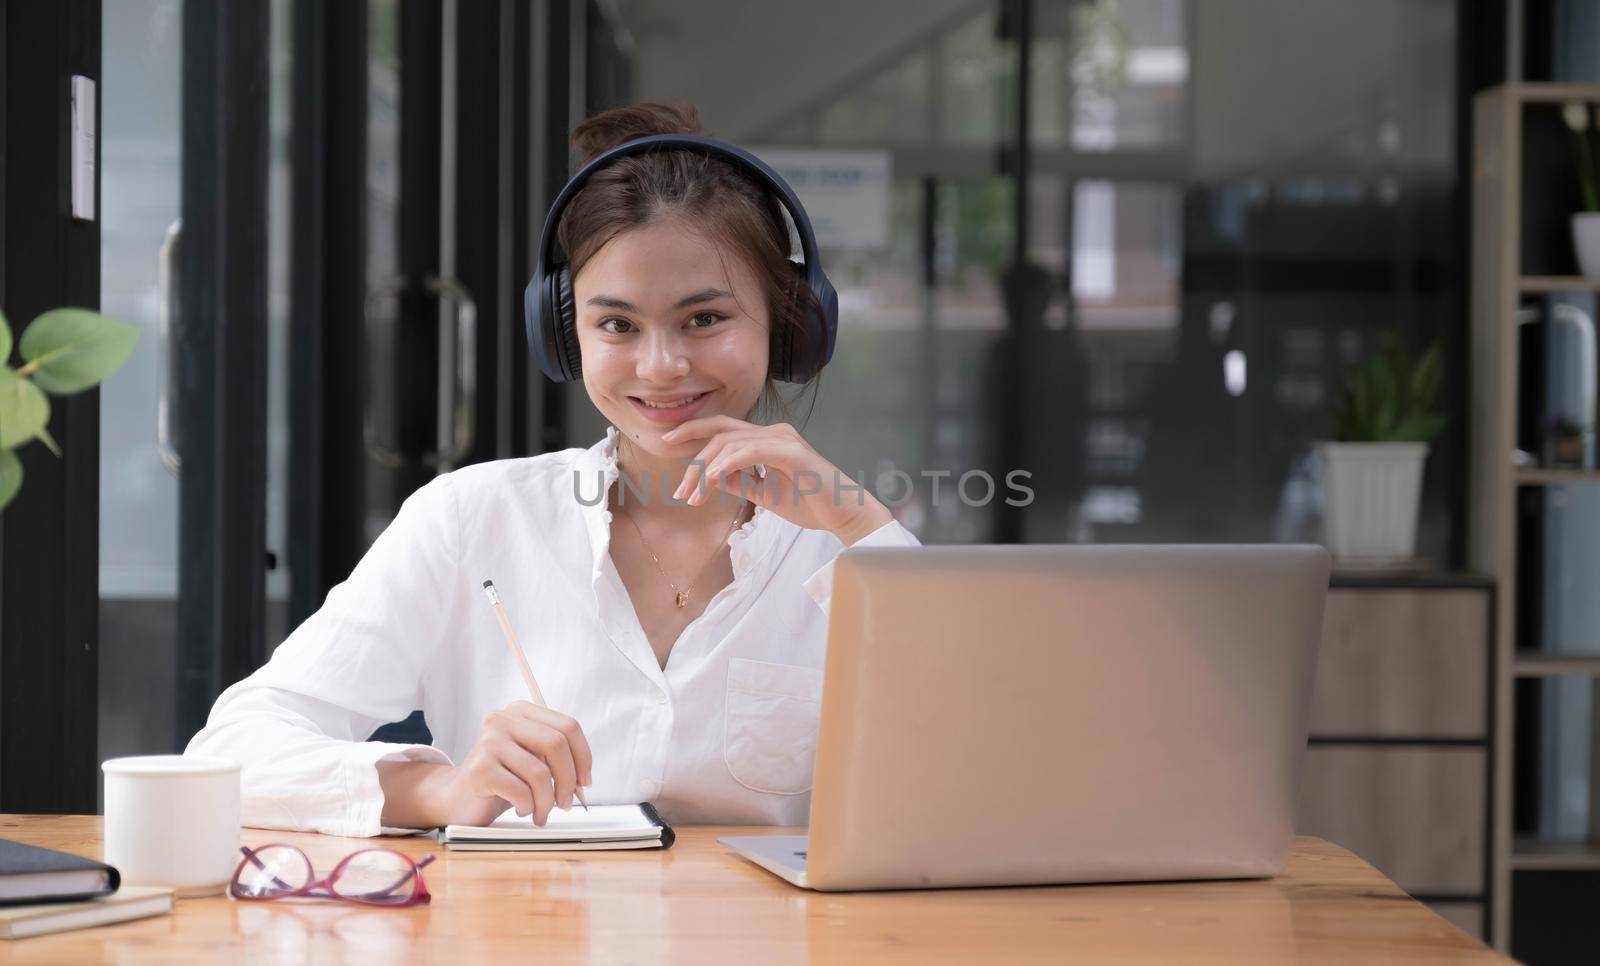 girl practicing online Use a laptop and a wireless headset. looking at camera.